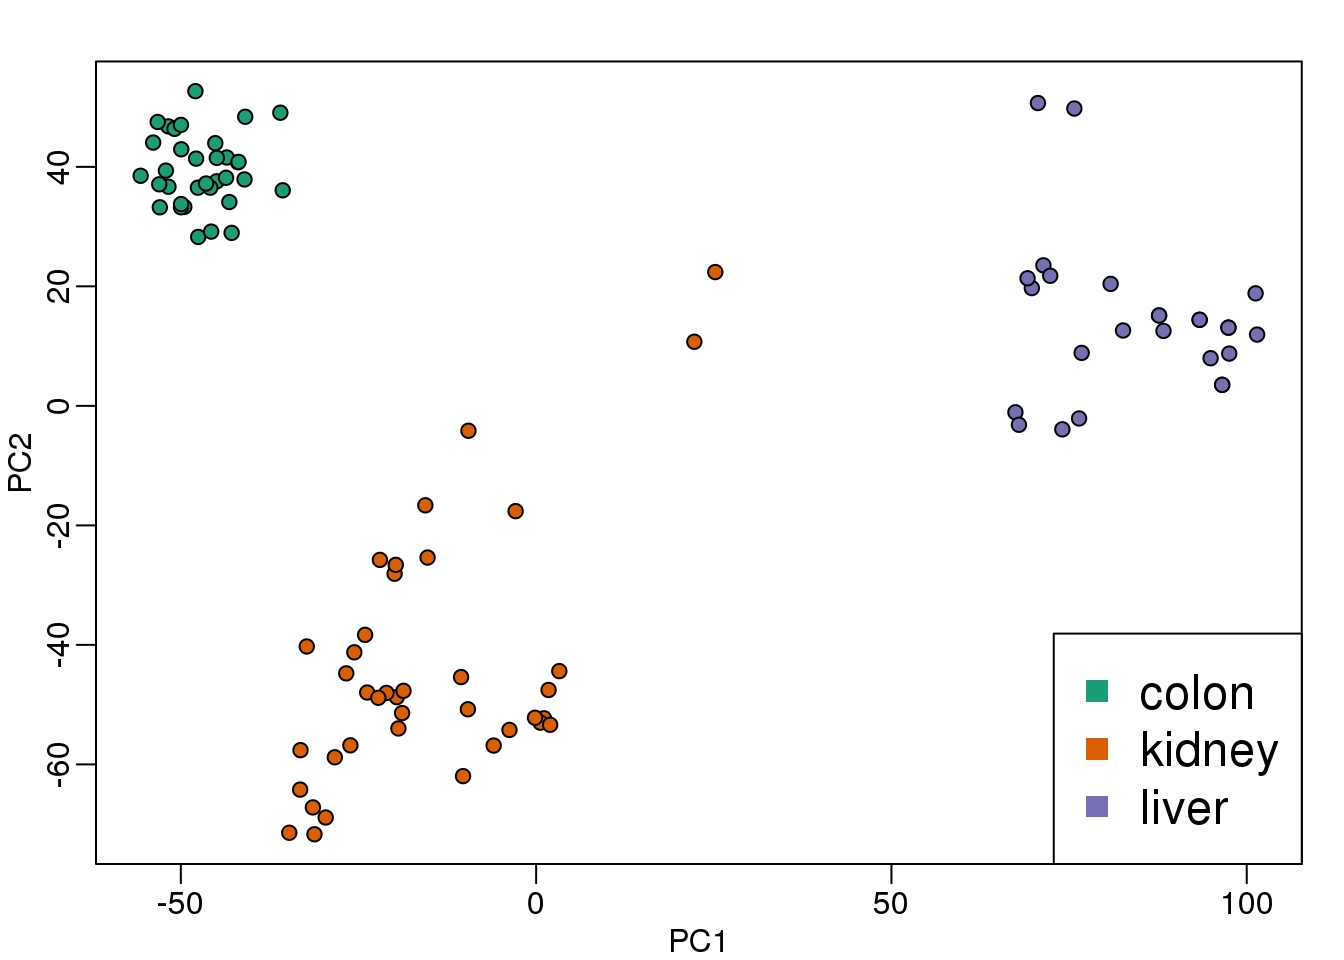 Multi-dimensional scaling (MDS) plot for tissue gene expression data.